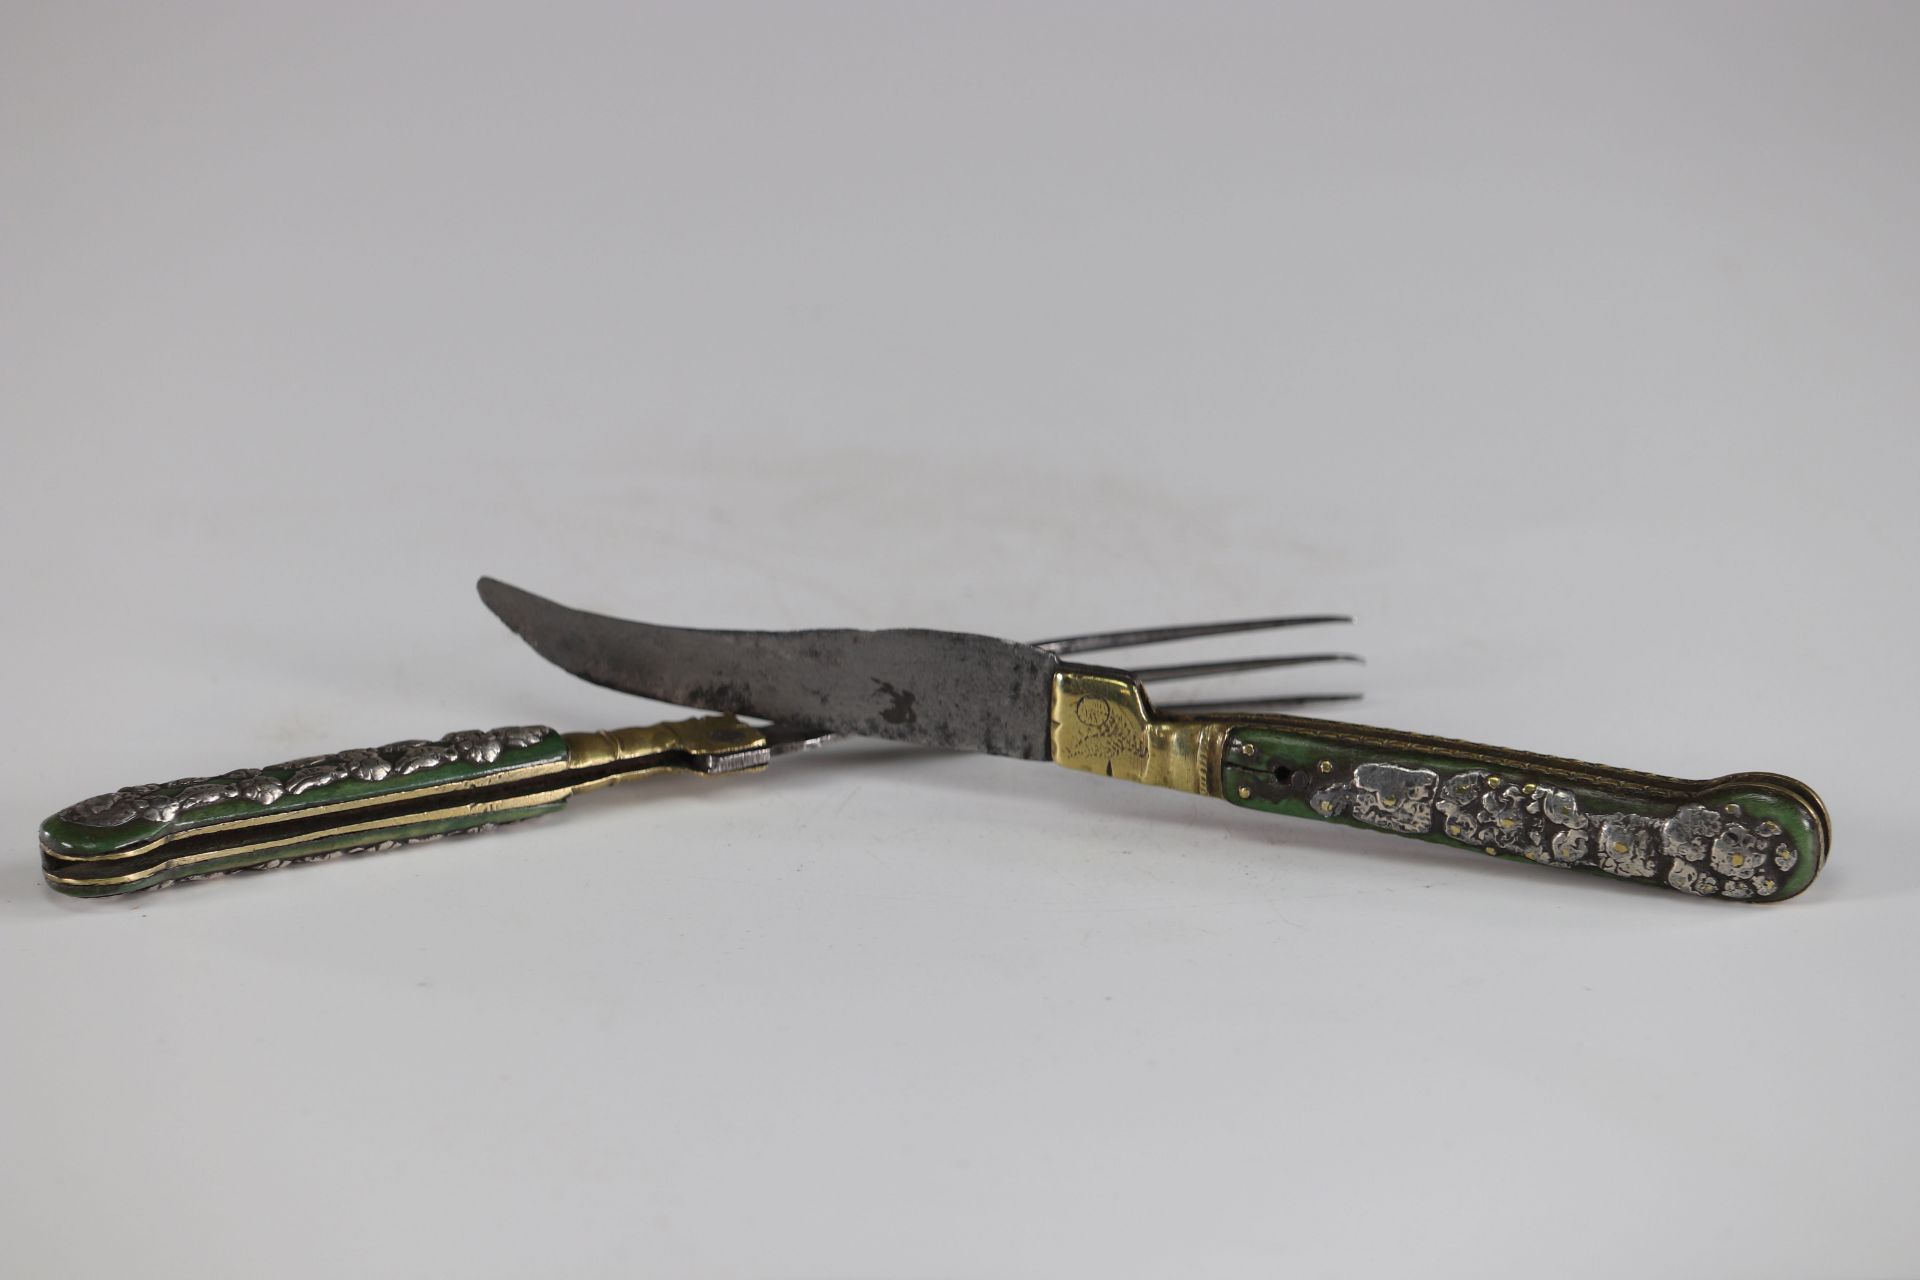 Pair of richly decorated 17th century cutlery